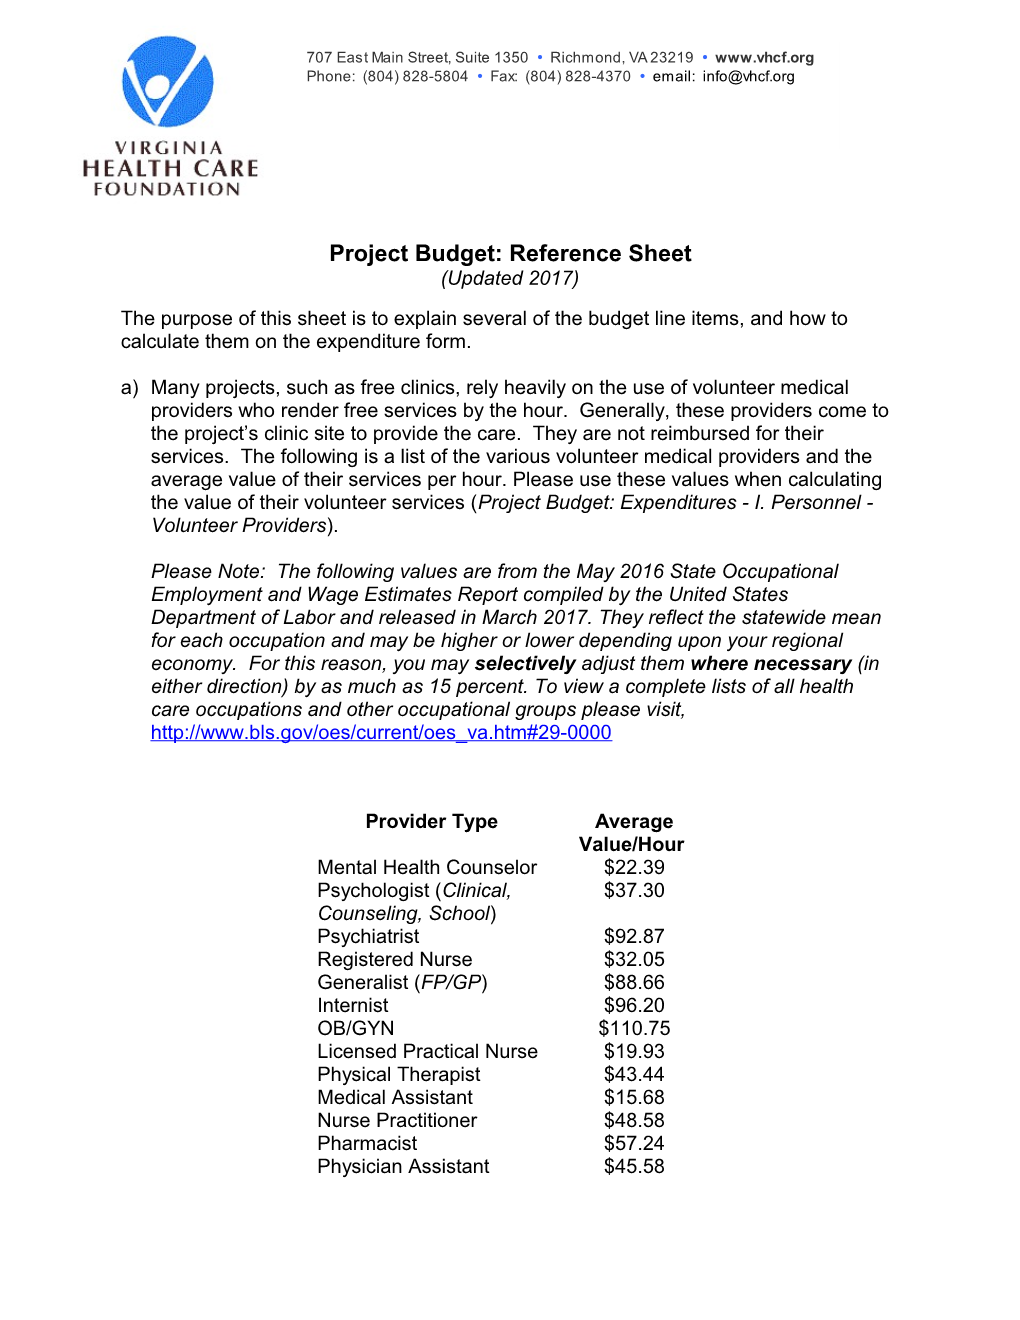 Project Budget Reference Sheet